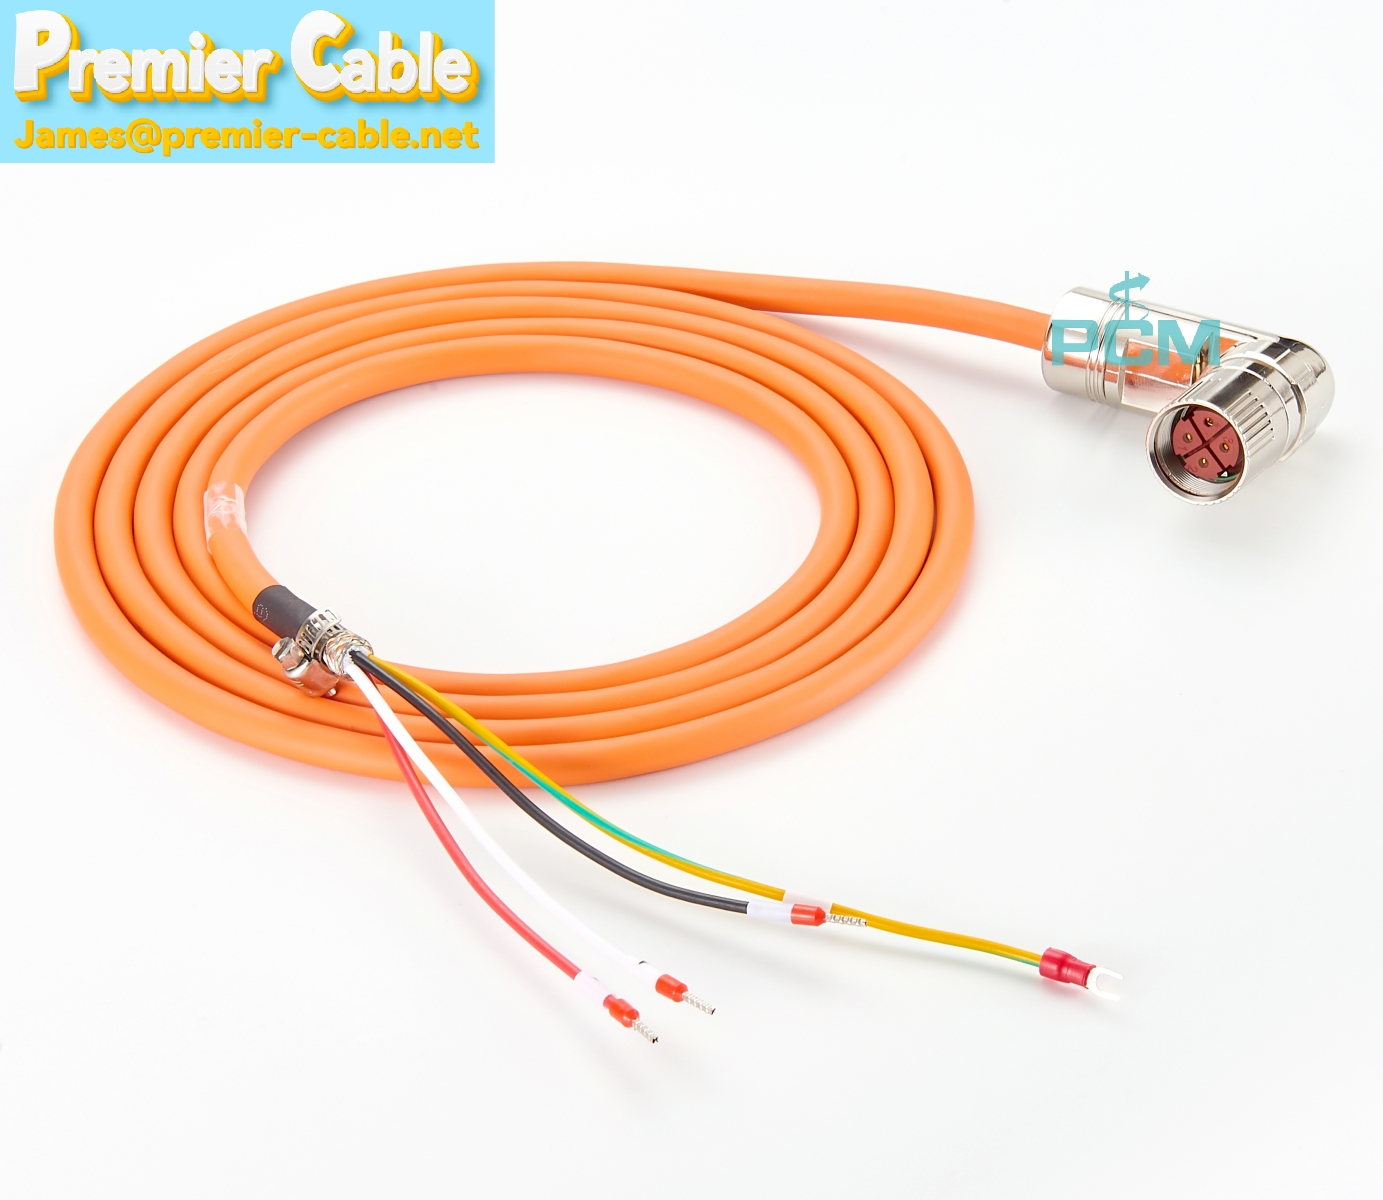 Power cable pre-assembled for V90 servo motor with M23 4 Pin connector